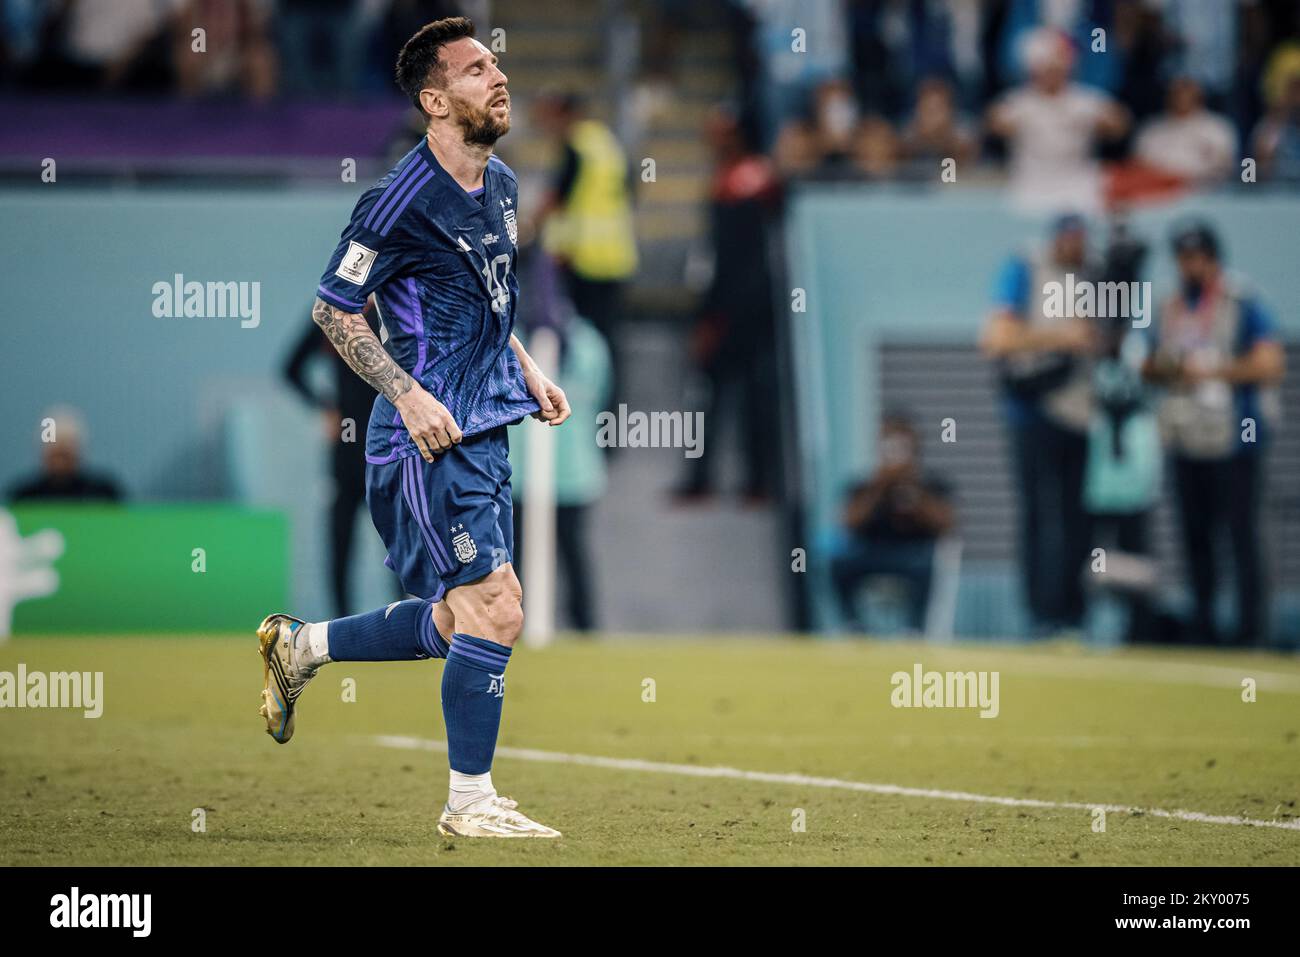 Doha, Qatar. 30th Nov, 2022. MESSI Lionel of Argentina misses a penalty during a match between Poland and Argentina, valid for the group stage of the World Cup, held at Stadium 974 in Doha, Qatar. Credit: Marcelo Machado de Melo/FotoArena/Alamy Live News Stock Photo